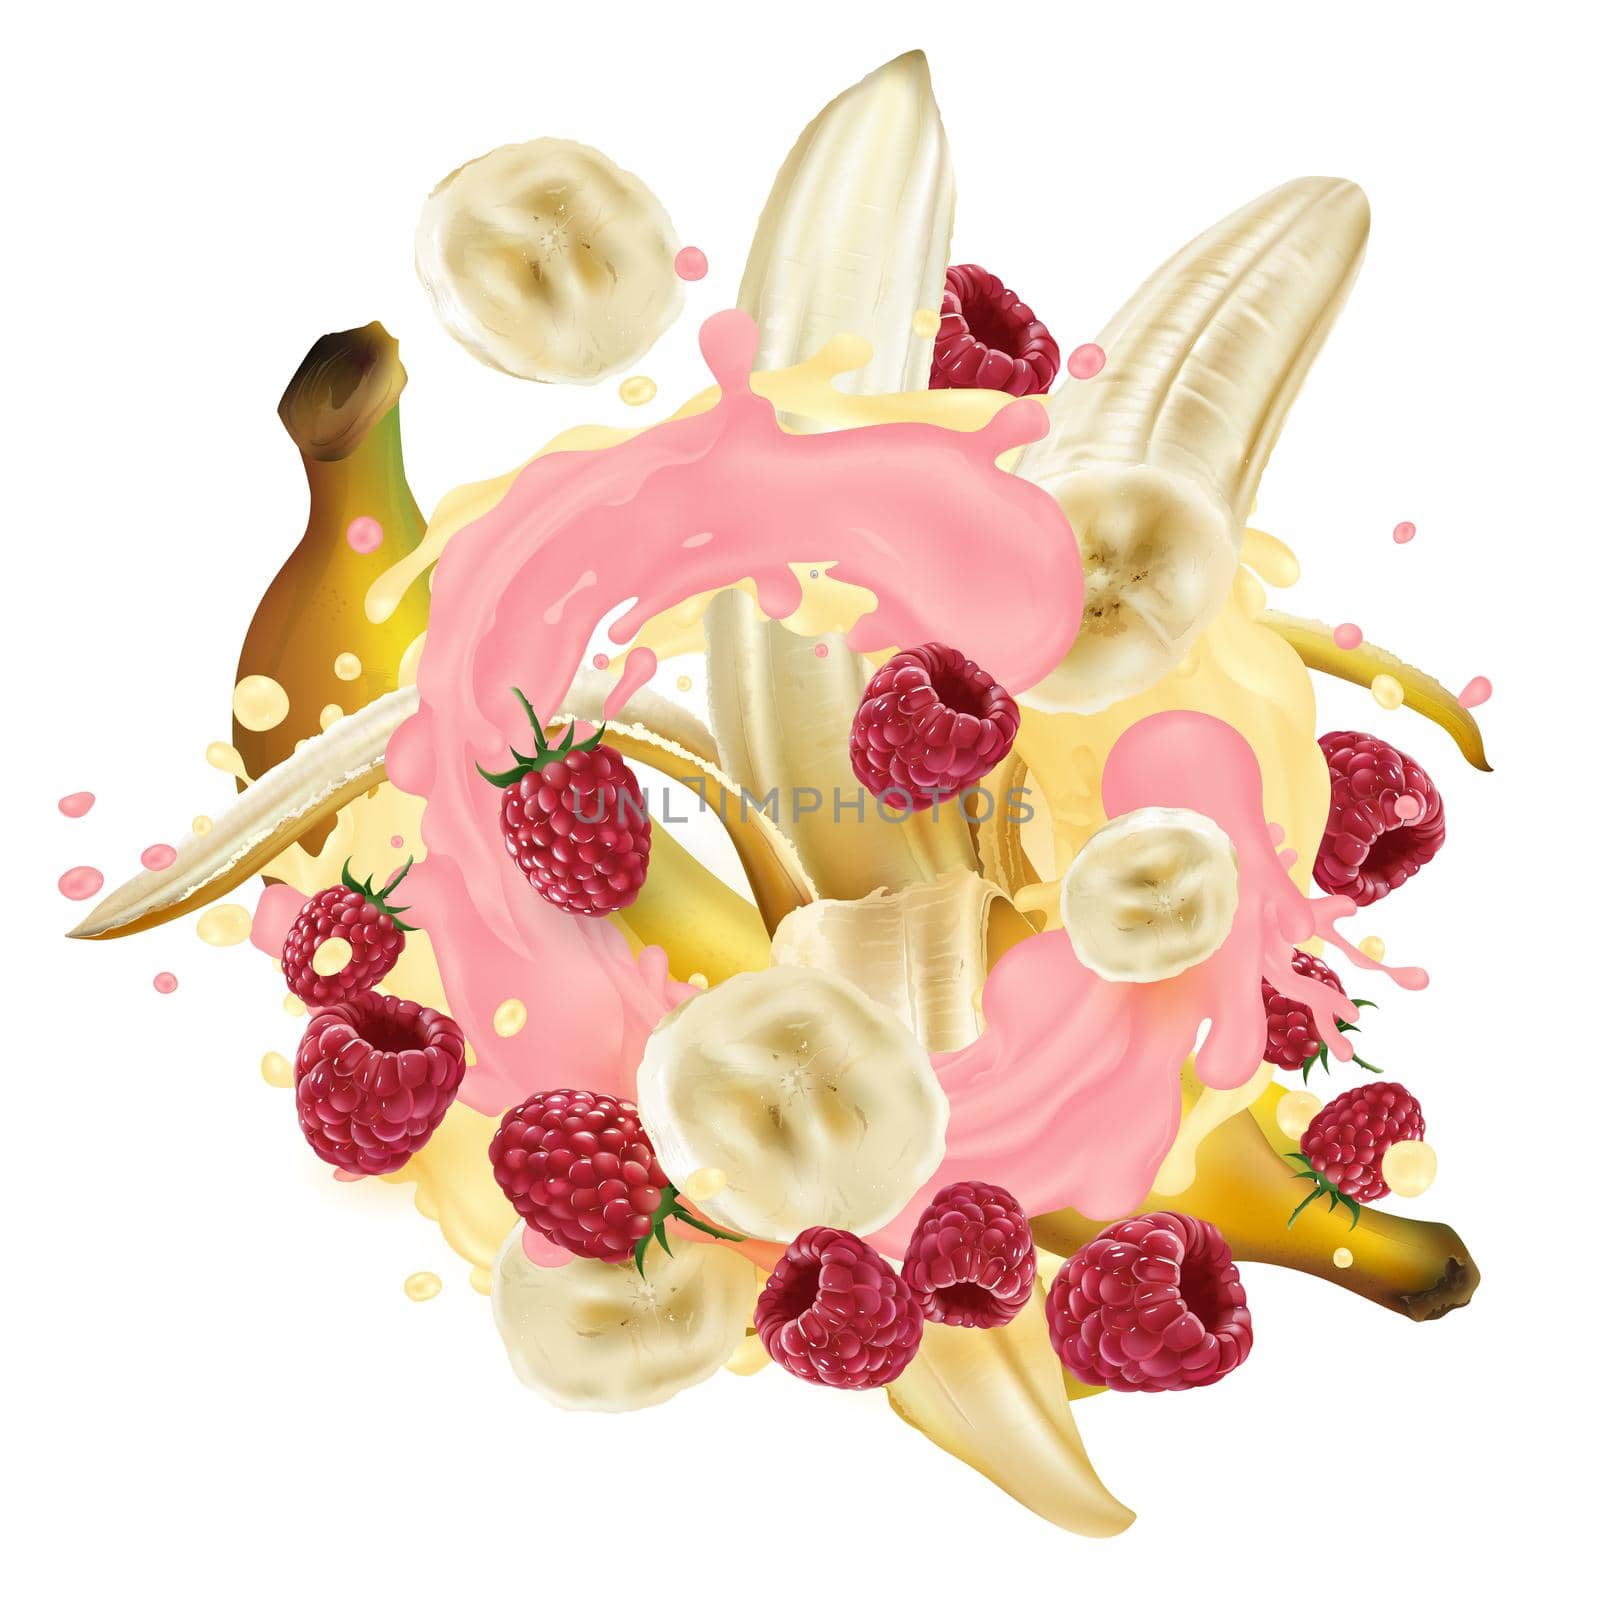 Bananas and raspberries in a pink and yellow yogurt splash. by ConceptCafe